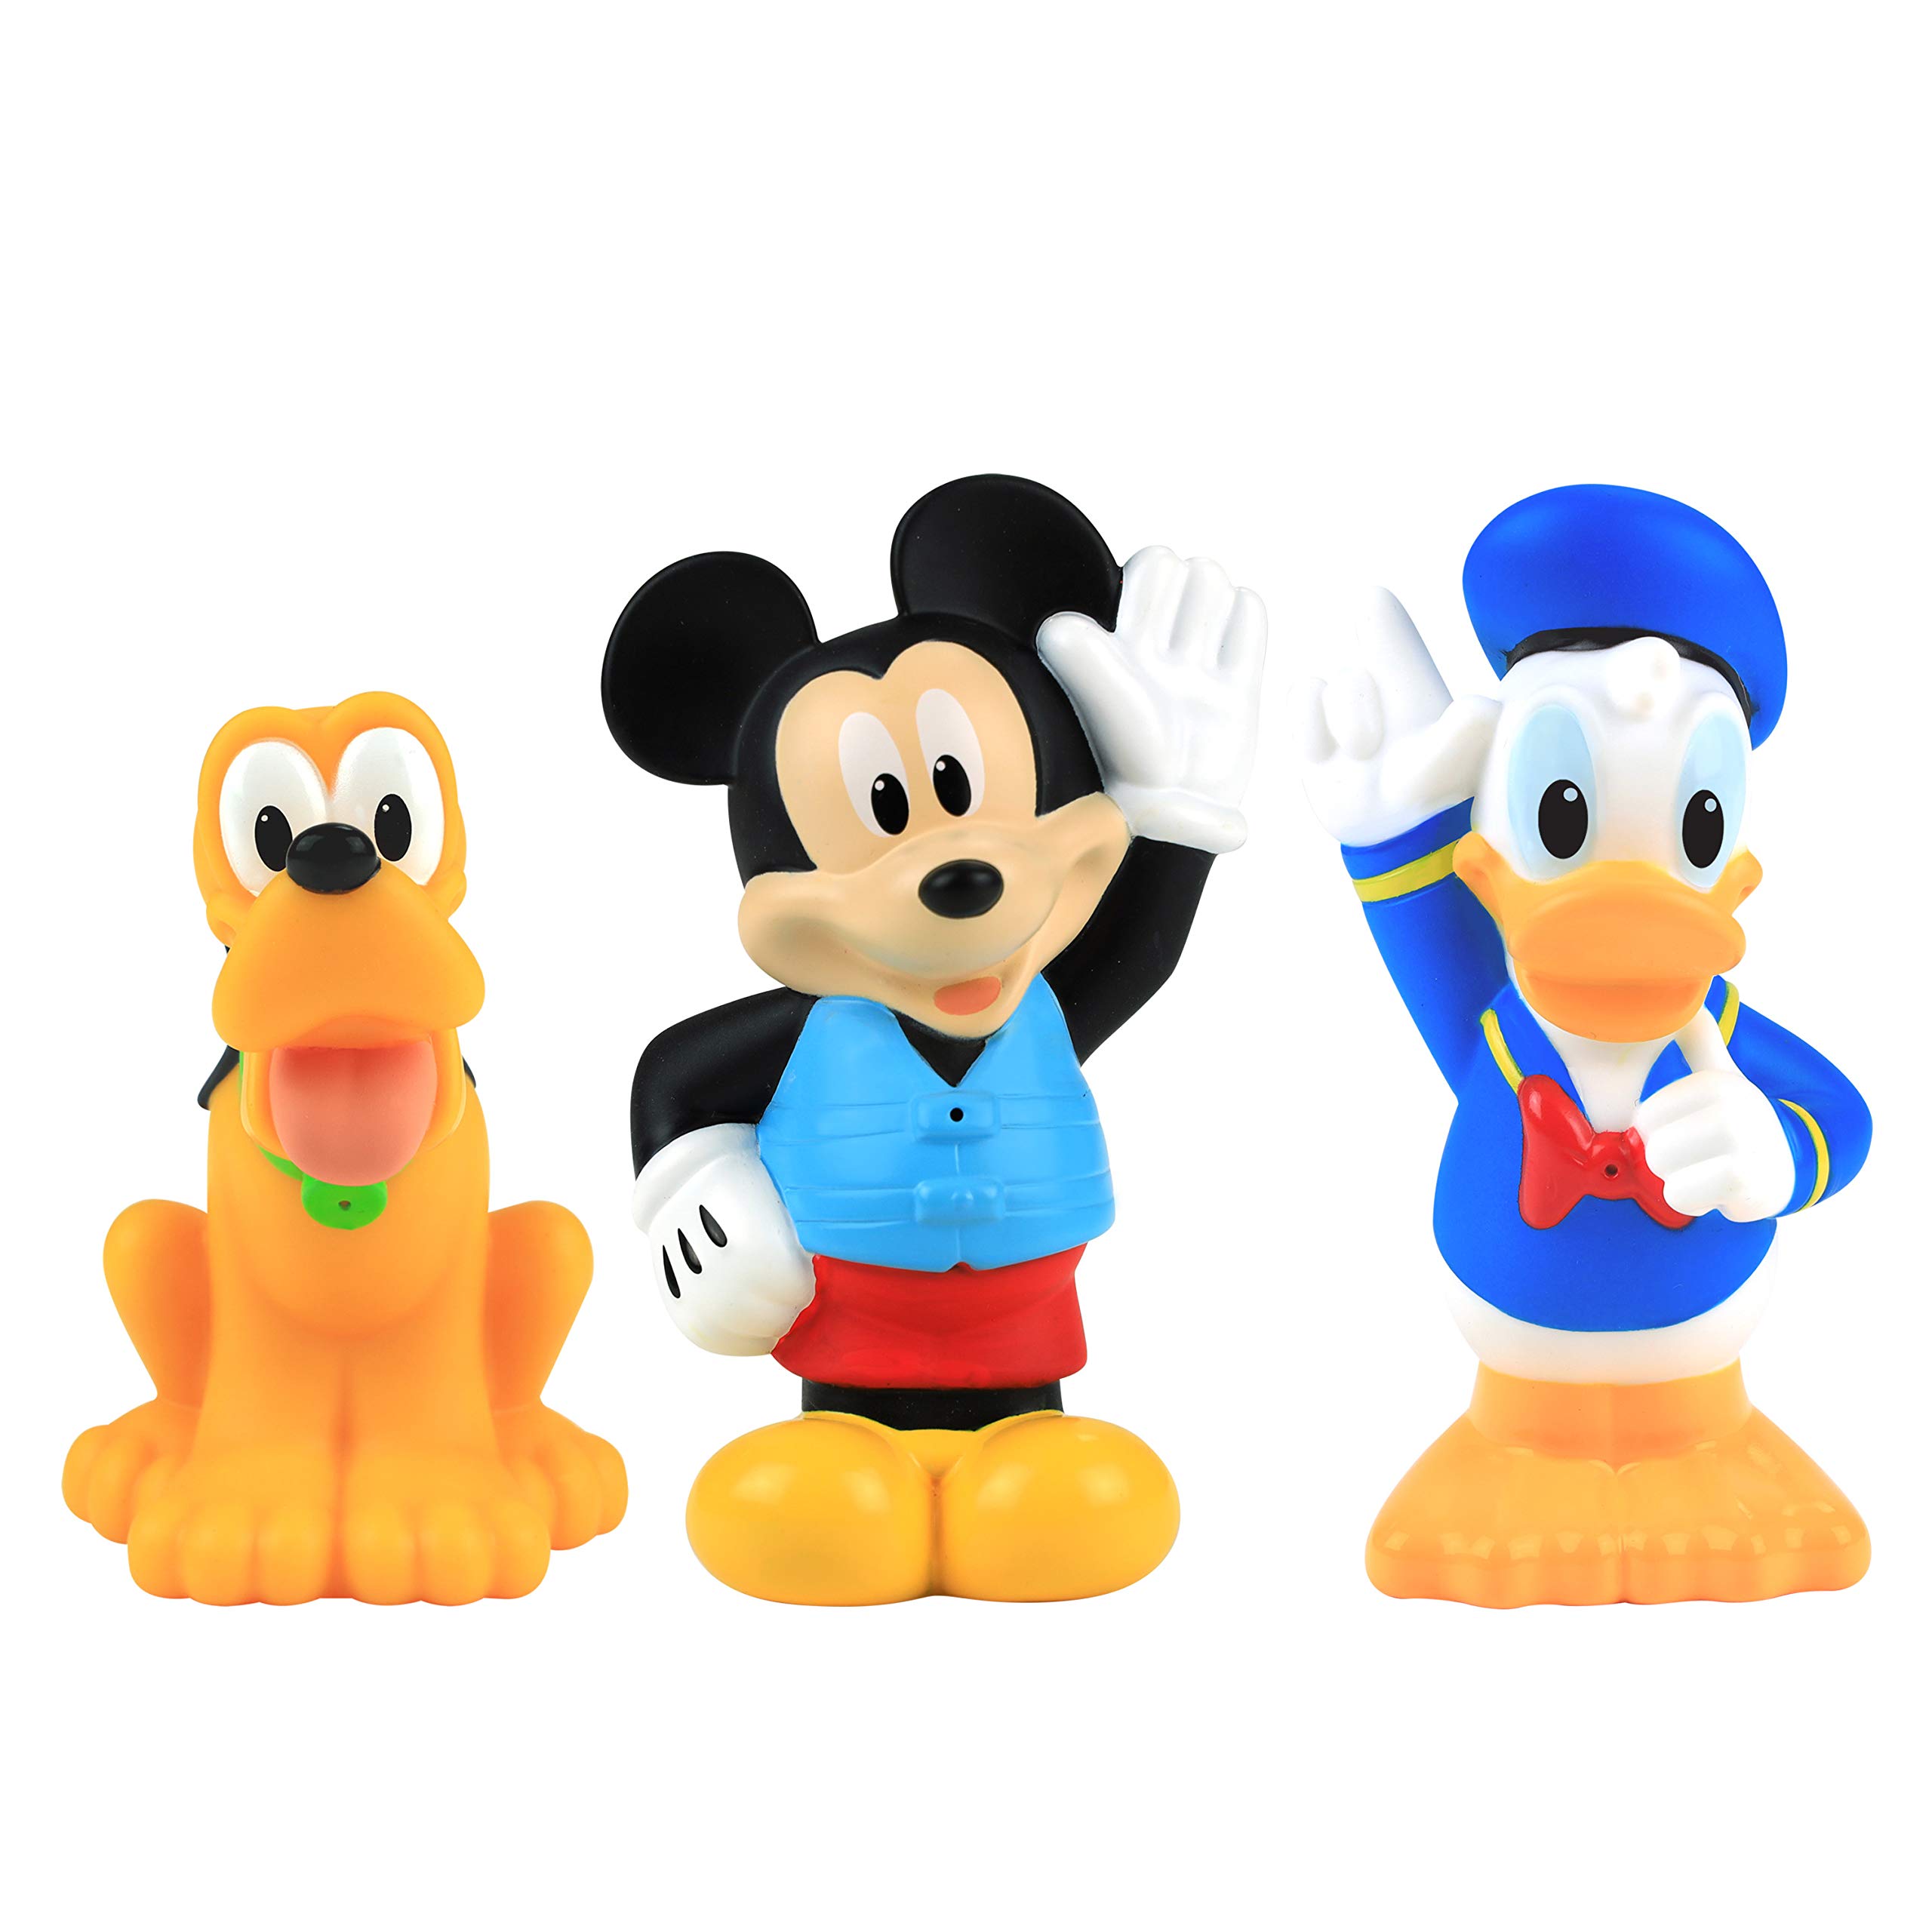 Disney Junior Mickey Mouse Bath Toy Set, Includes Mickey Mouse, Donald Duck, and Pluto Water Toys, Amazon Exclusive, by Just Play